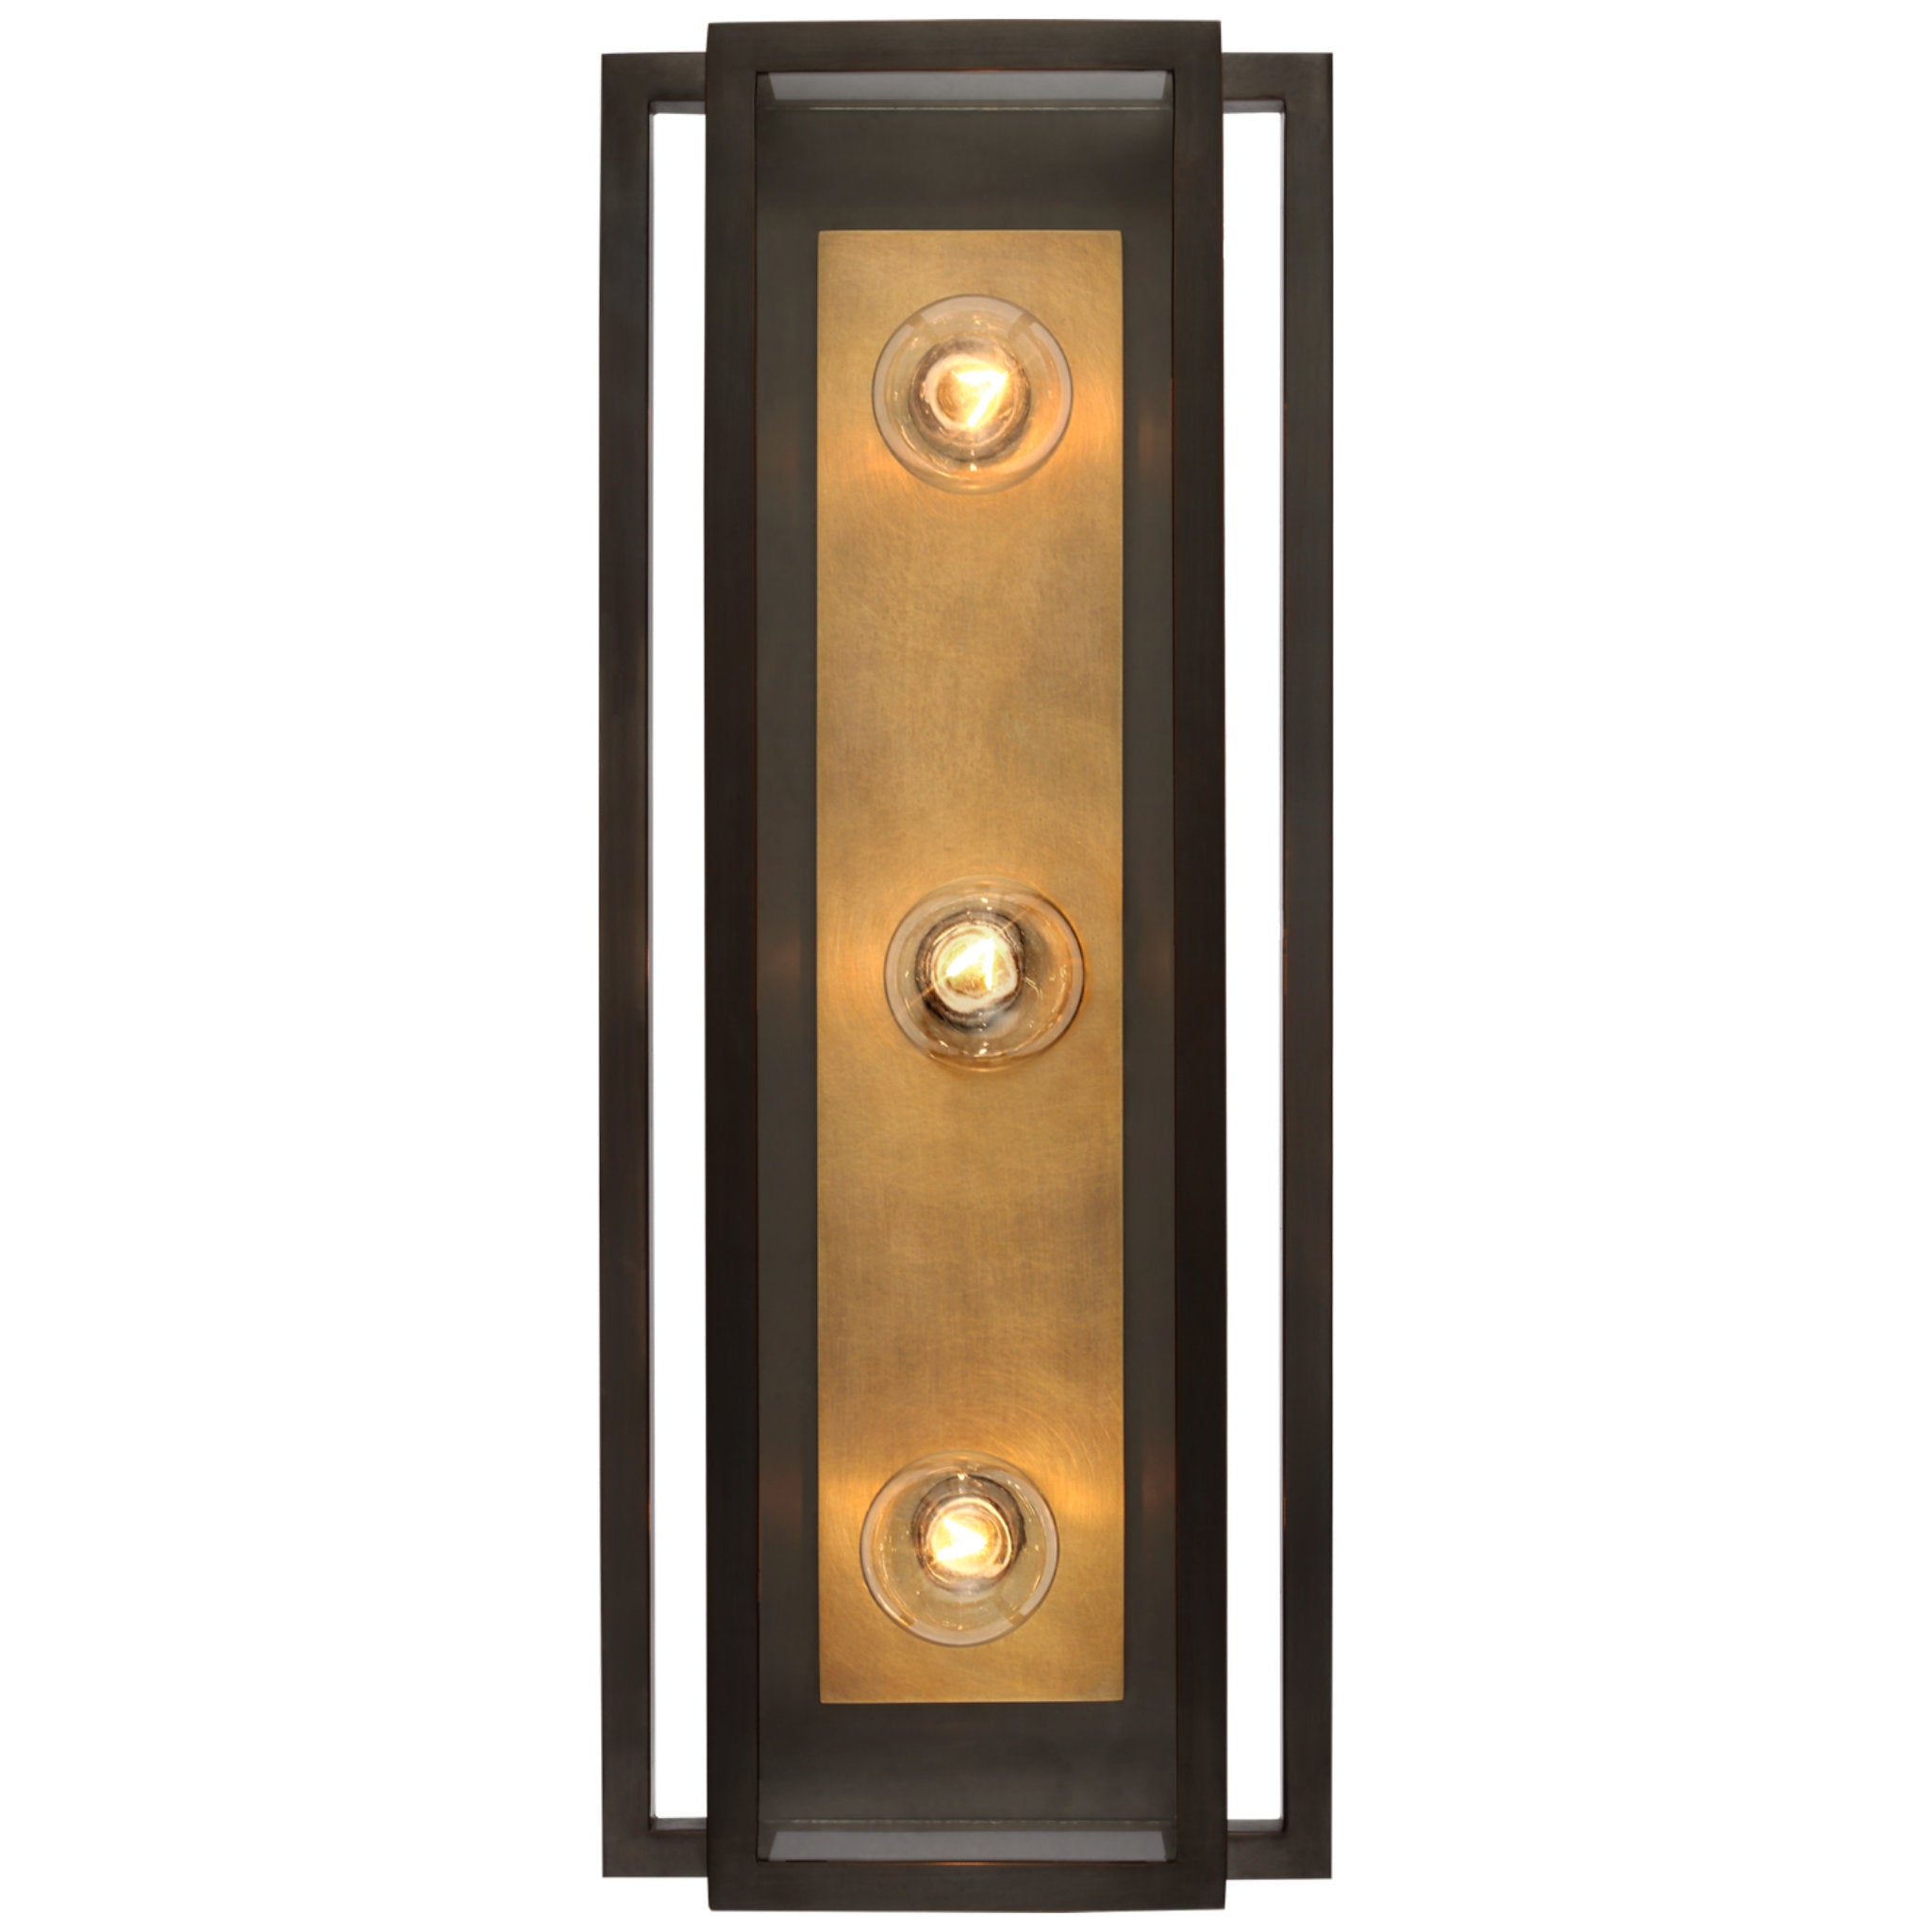 Ian K. Fowler Halle 18" Vanity Light in Bronze and Hand-Rubbed Antique Brass with Clear Glass